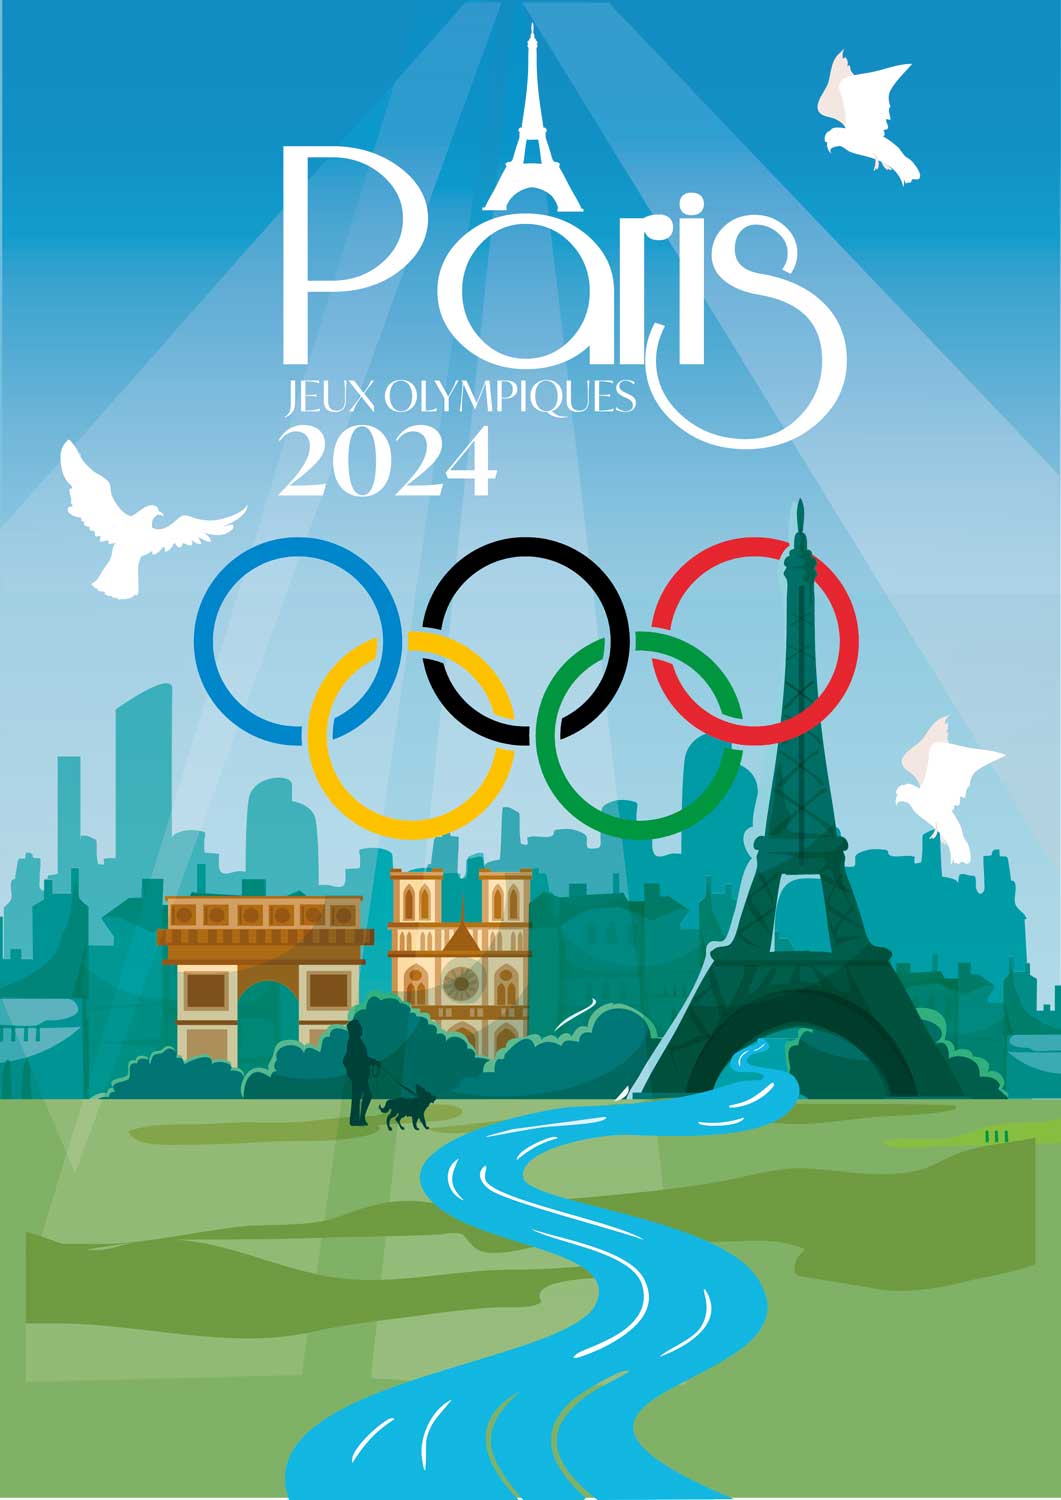 Complete Guide to the Paris 2024 Olympic Games Dates, Events, and Hig